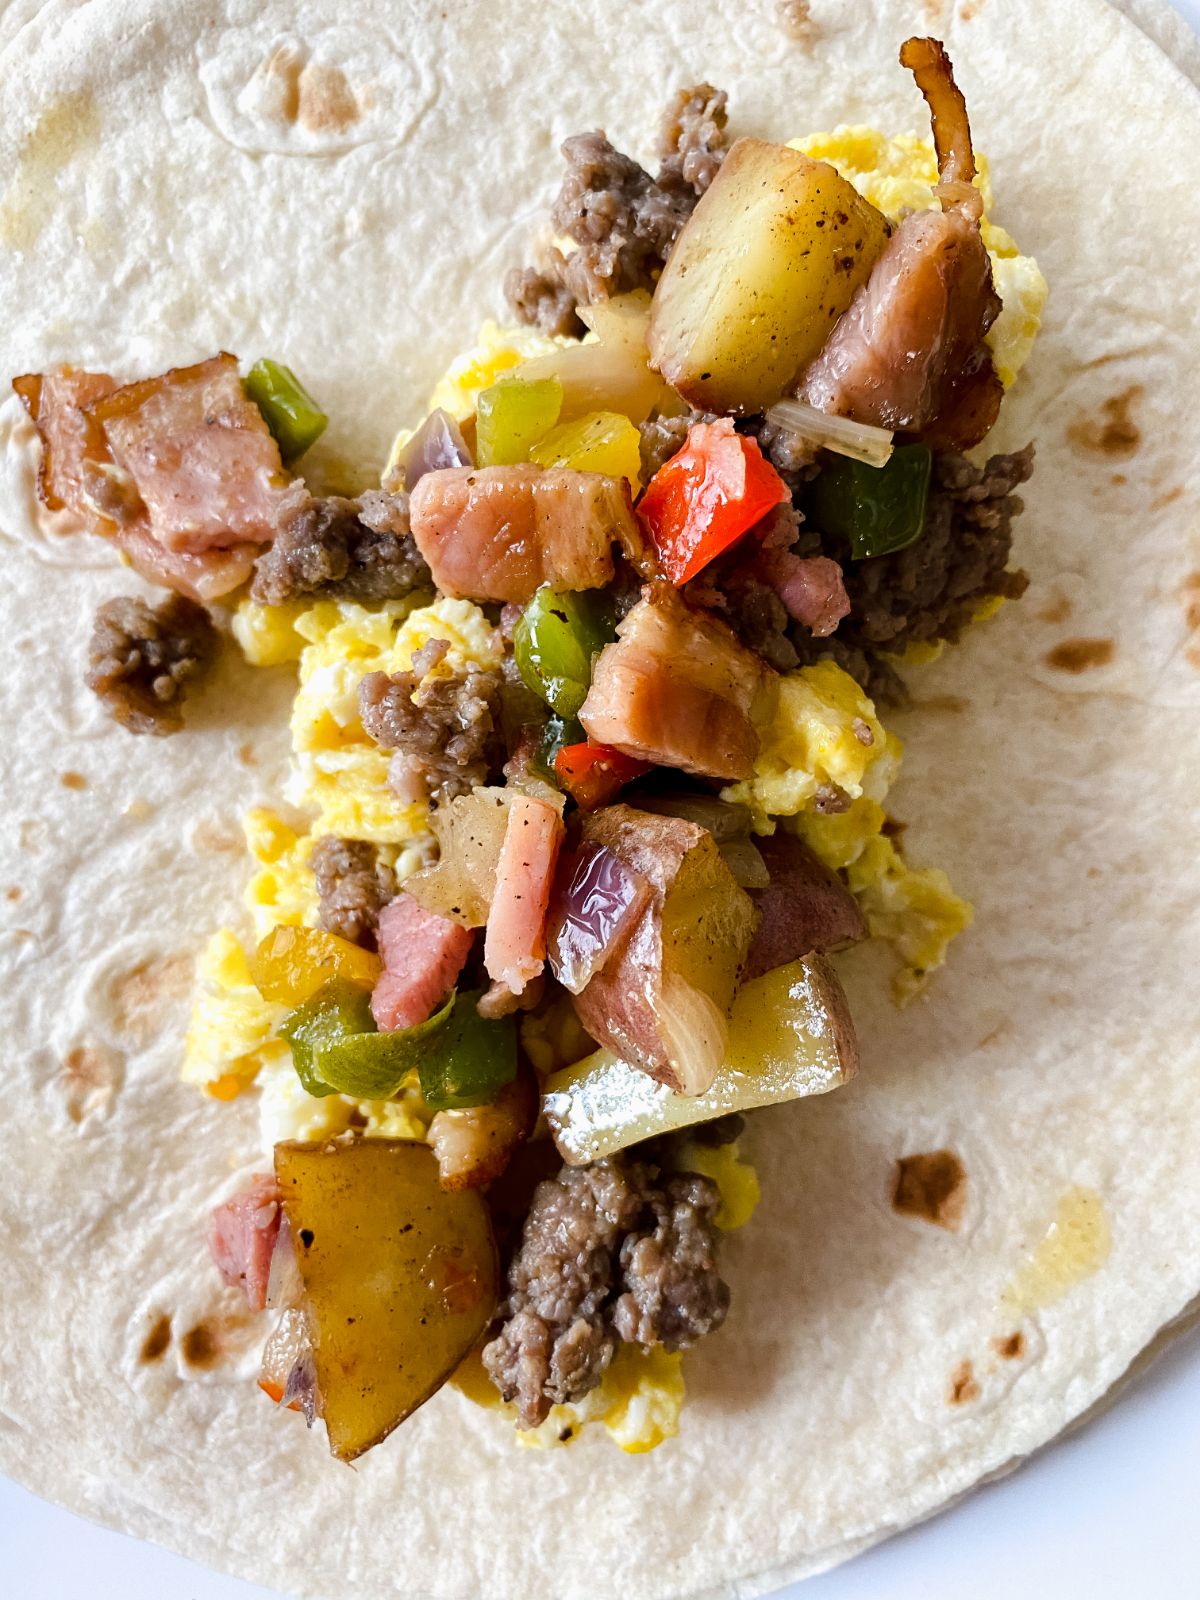 potatoes on top of eggs and sausage on tortilla